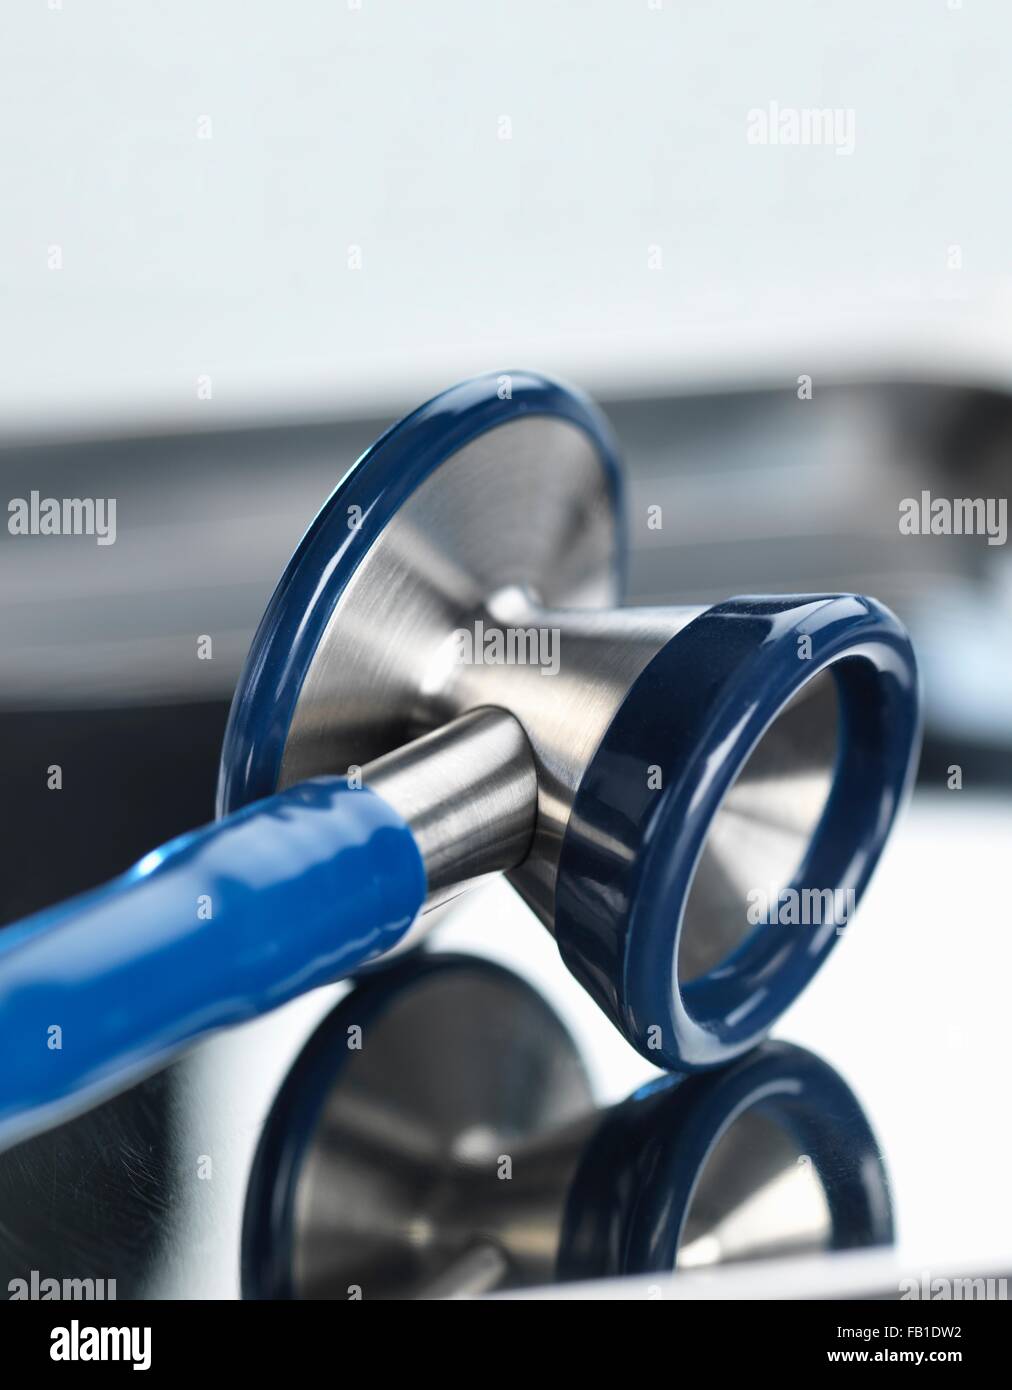 Close-up view of stethoscope on medical tray Stock Photo